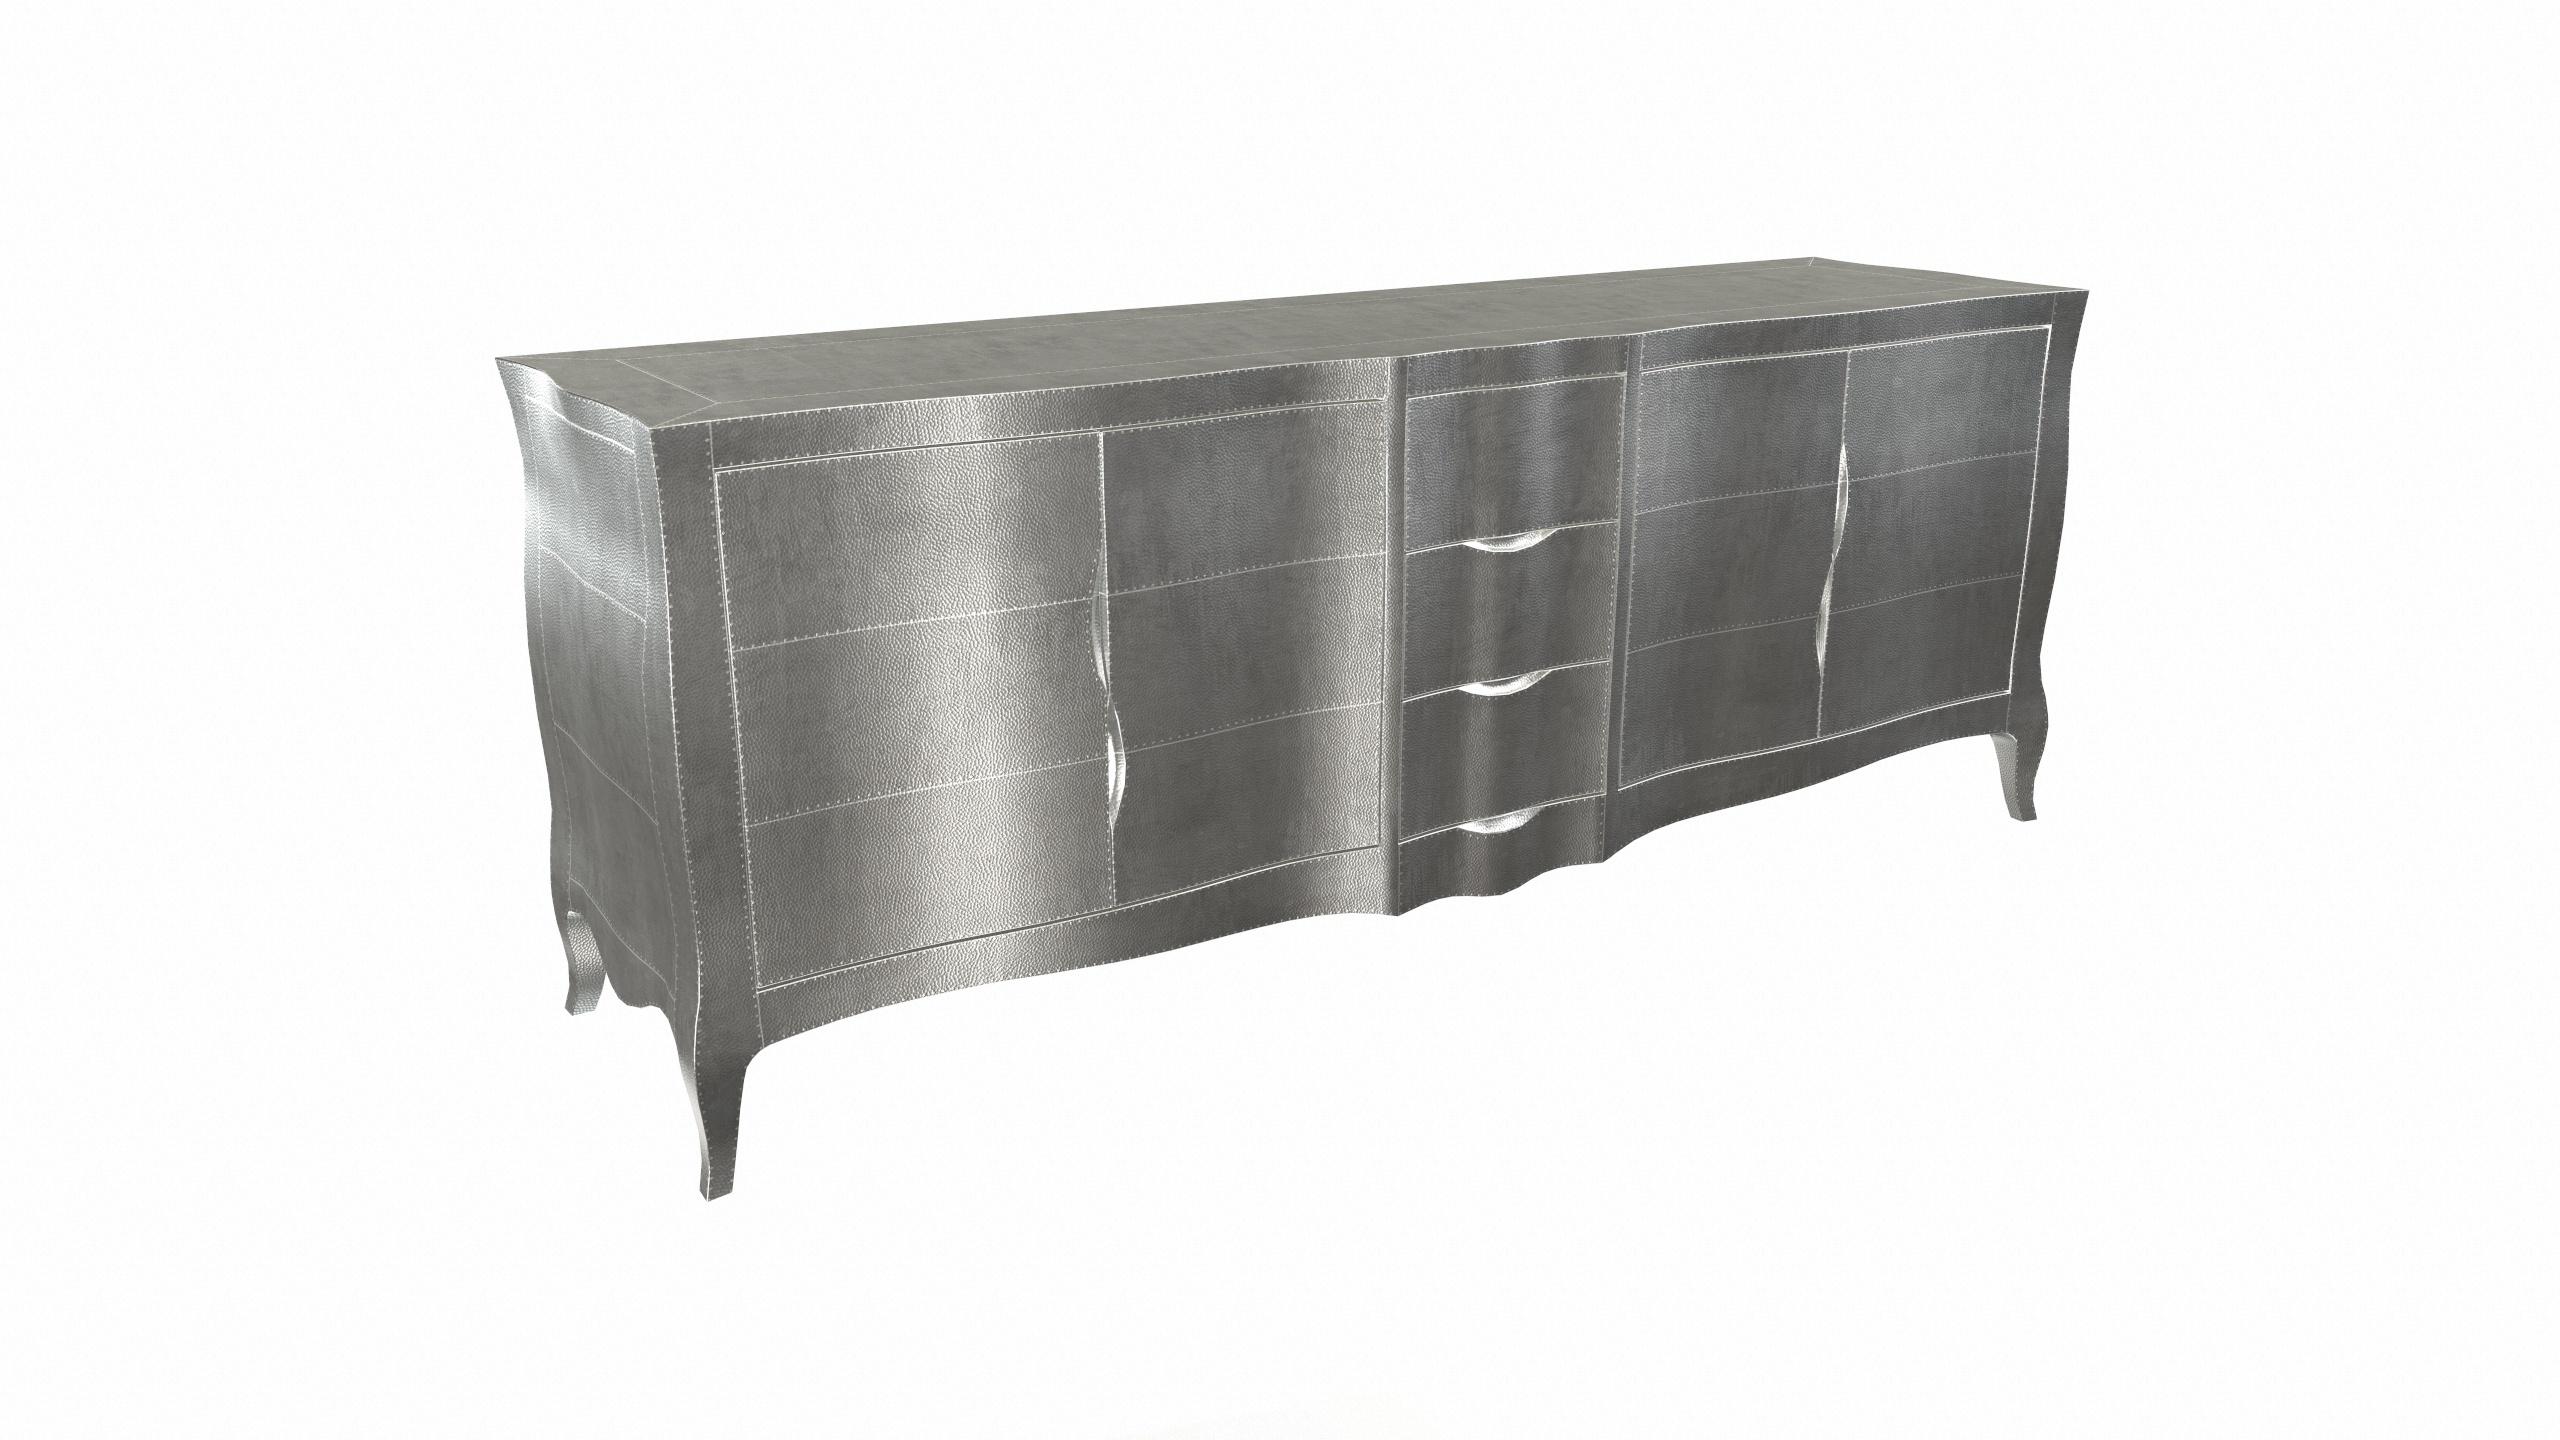 Contemporary Louise Credenza Art Deco Credenzas in Mid. Hammered White Bronze by Paul Mathieu For Sale